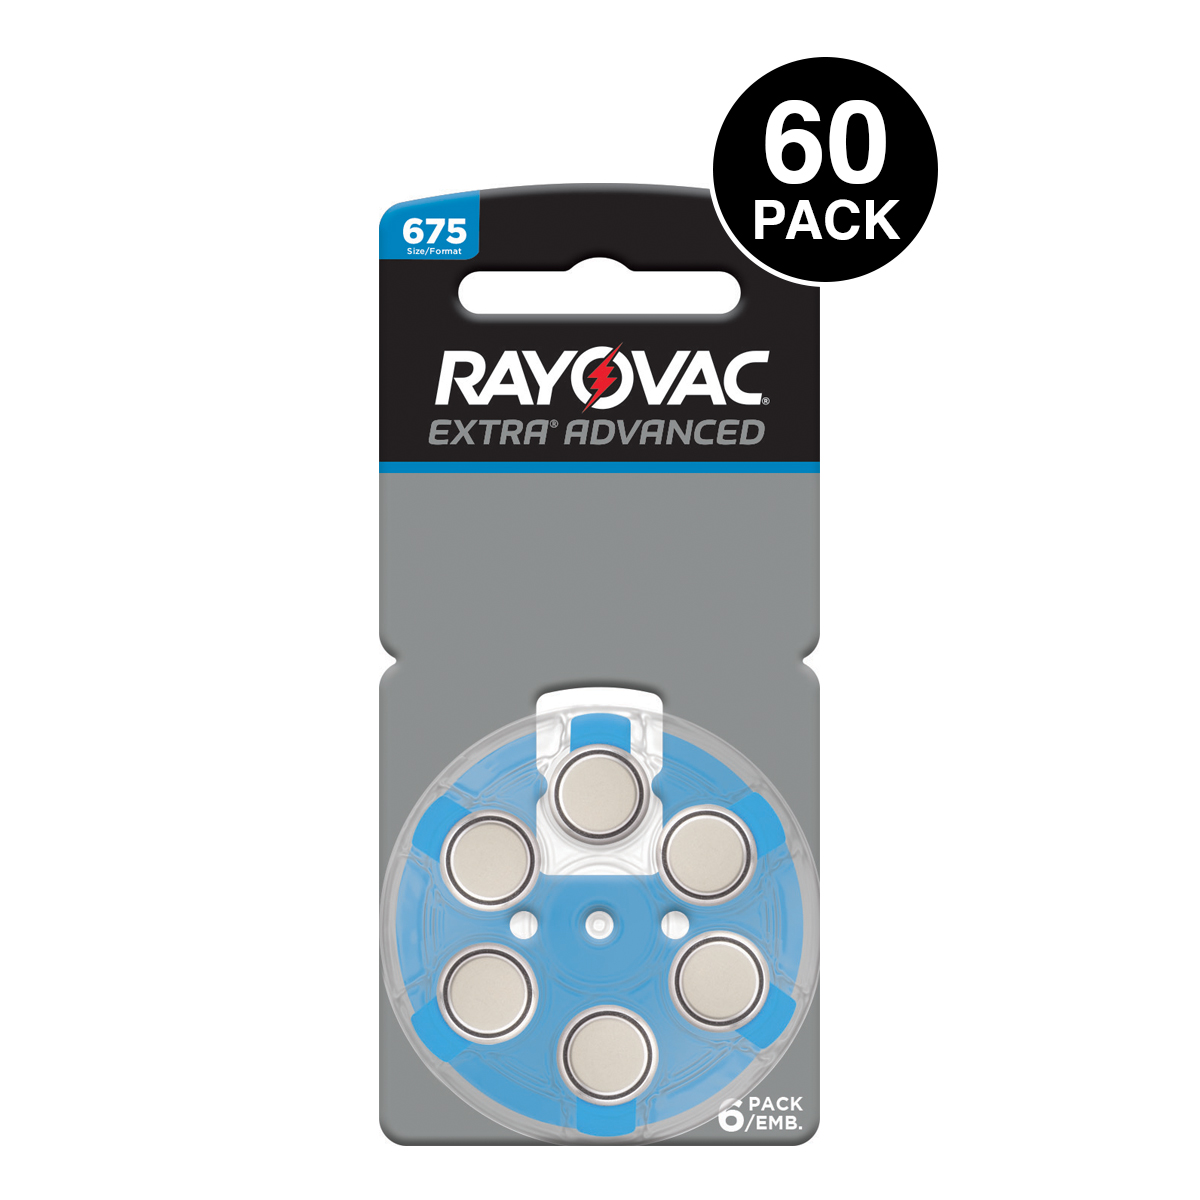 Rayovac Extra Advanced Hearing Aid Batteries Size 675 (60 PC)